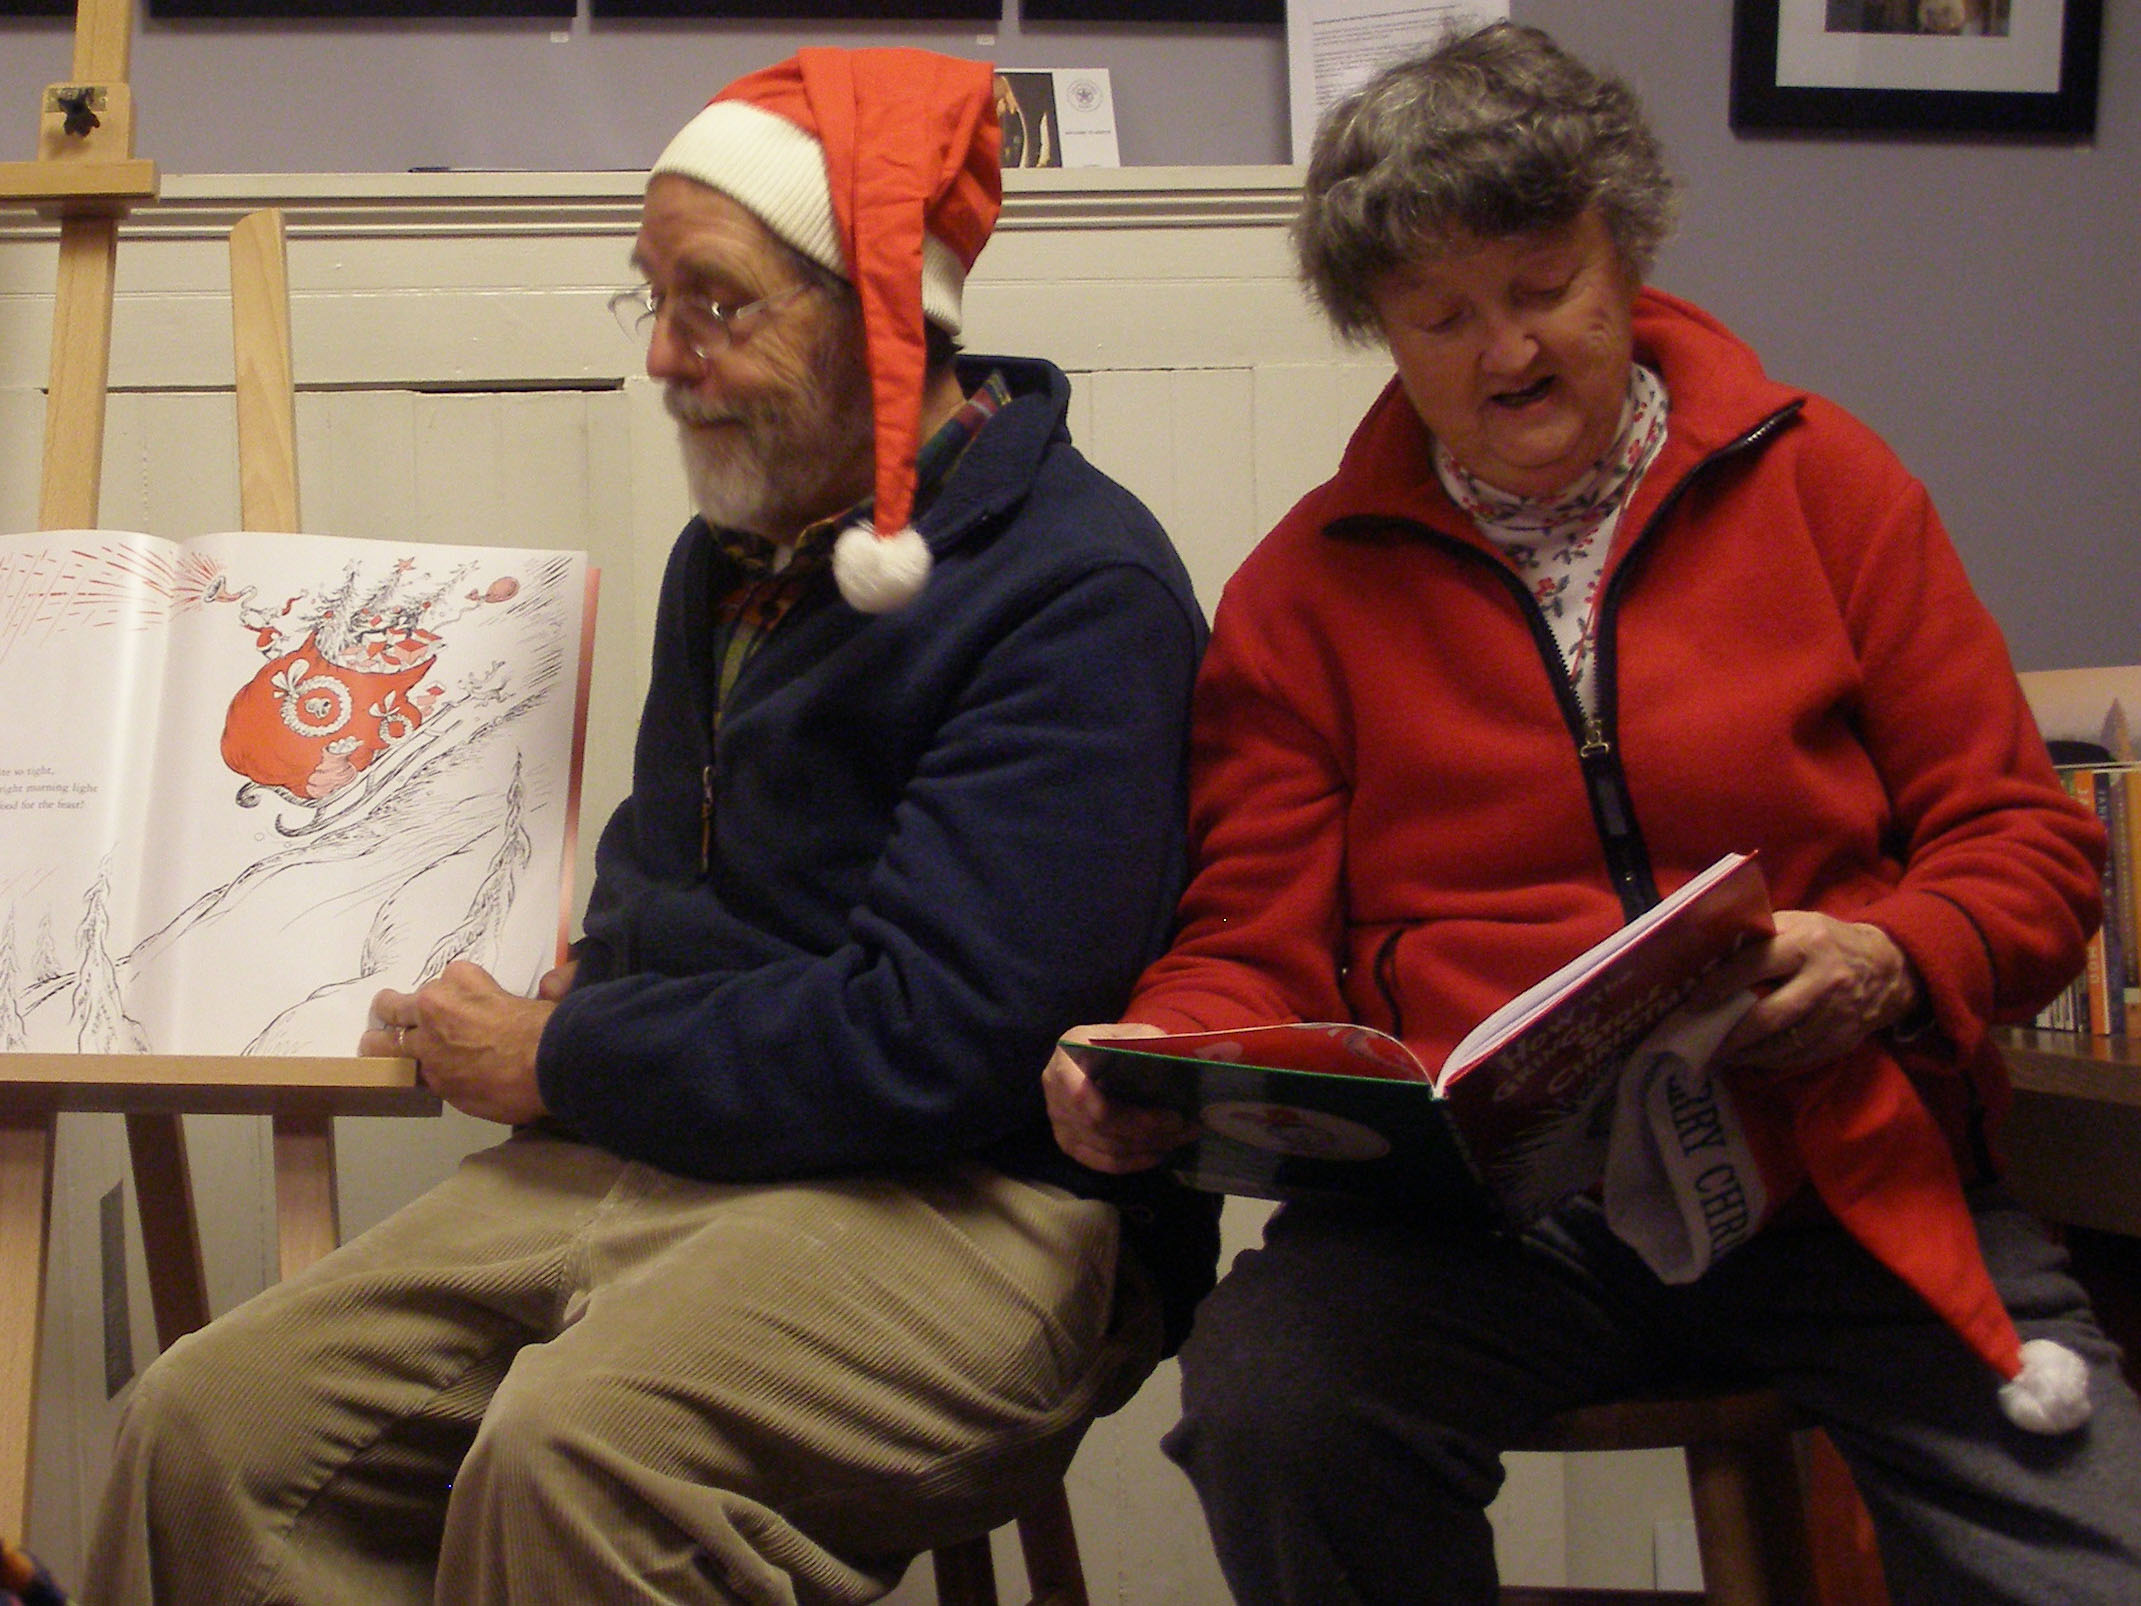 Thomas Chulak and Judy Staber read "How the Grinch Stole Christmas" and "A Snowy Day"